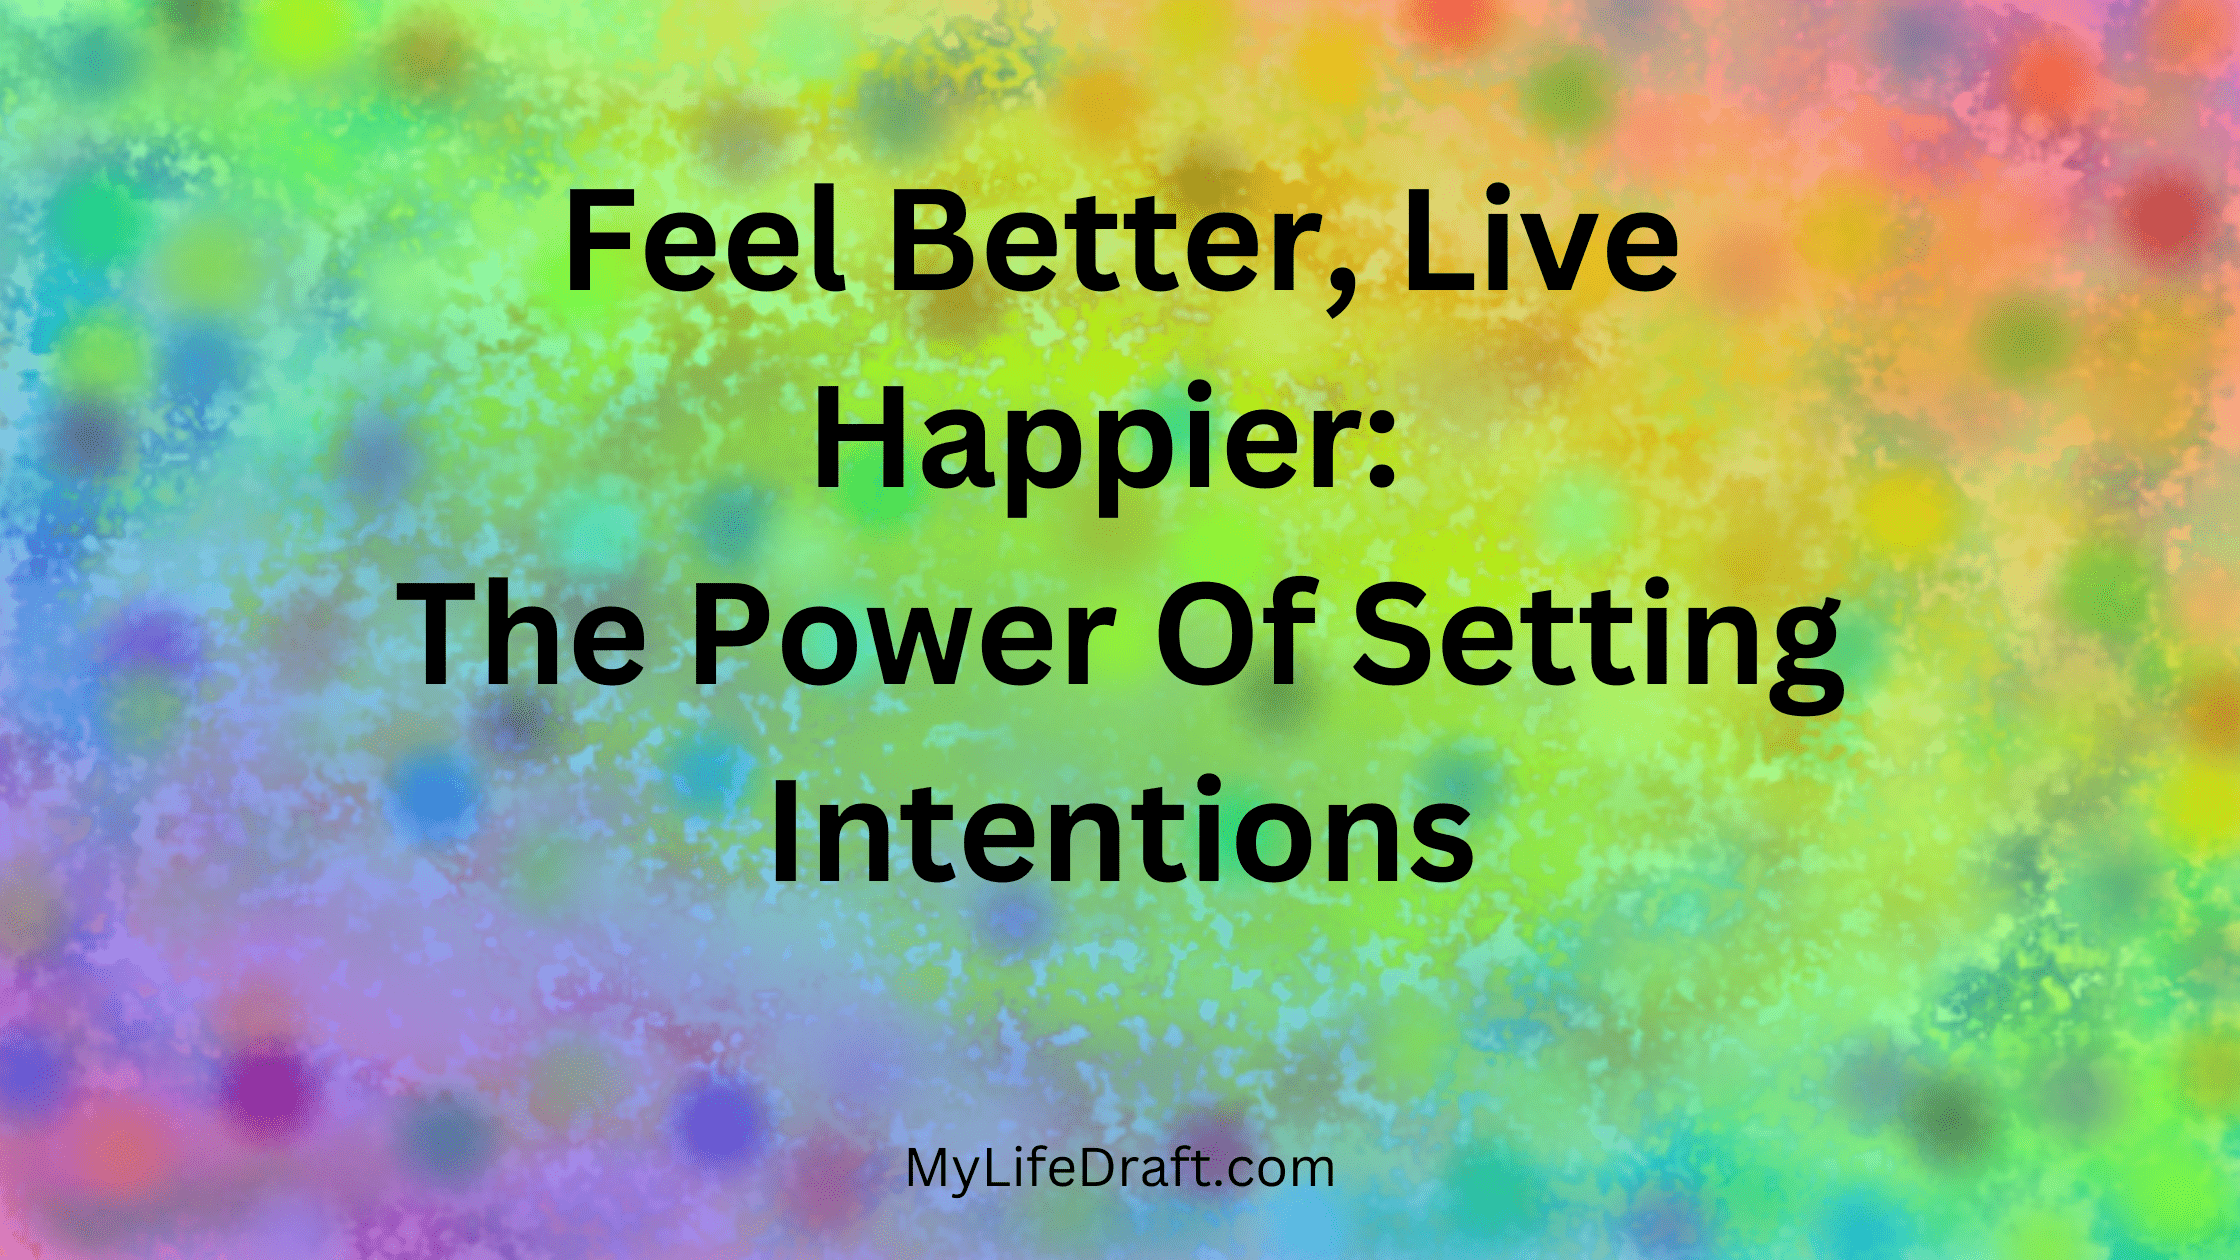 Feel Better, Live Happier: The Power of Setting Intentions